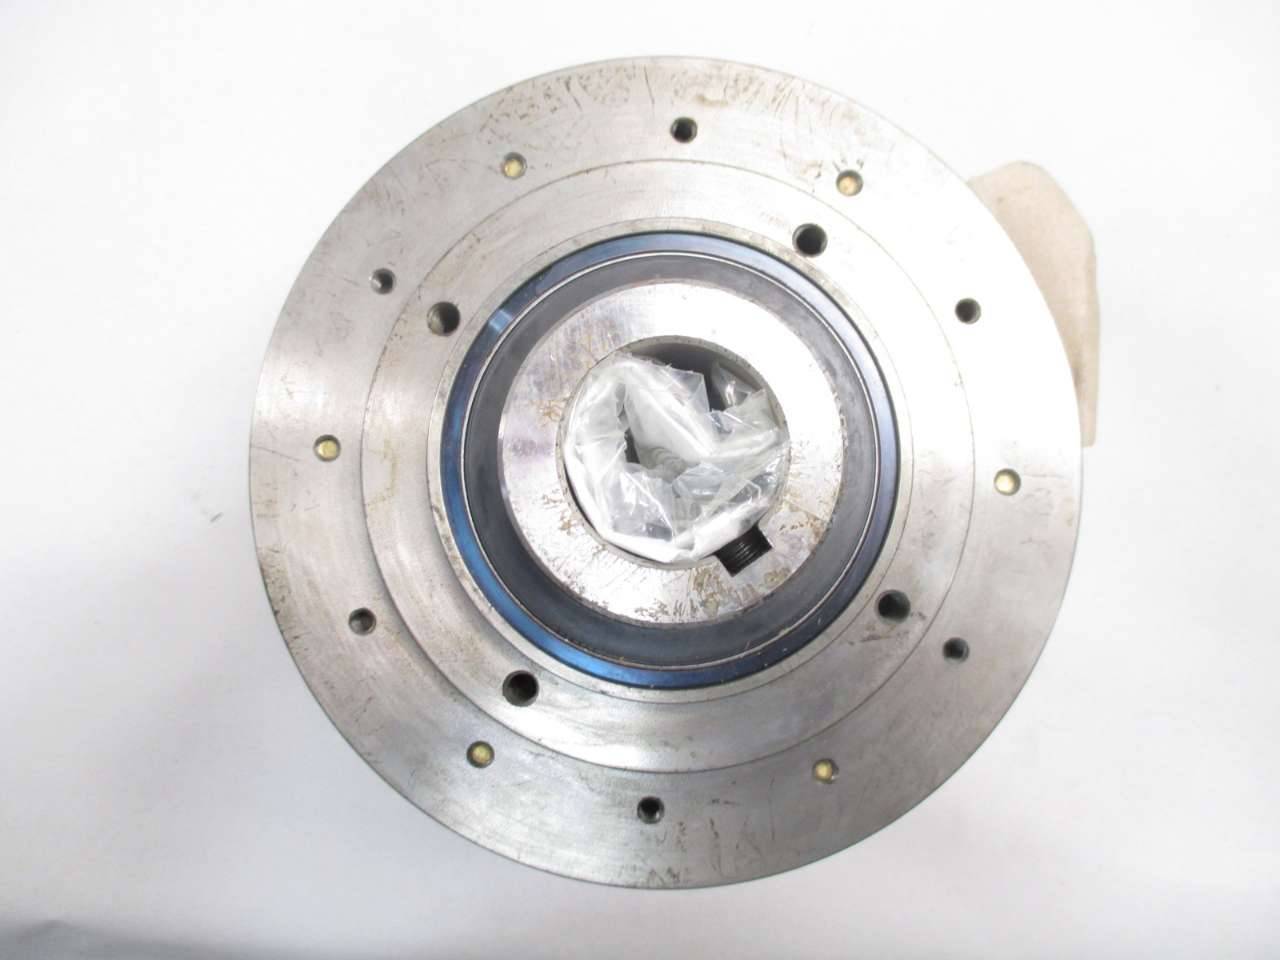 Air Engaged/Spring Release 1.625 in Straight Bore KW 2SS Single Plate Clutch Open Shaft Mounted M-800 Nexen 807668-807668 